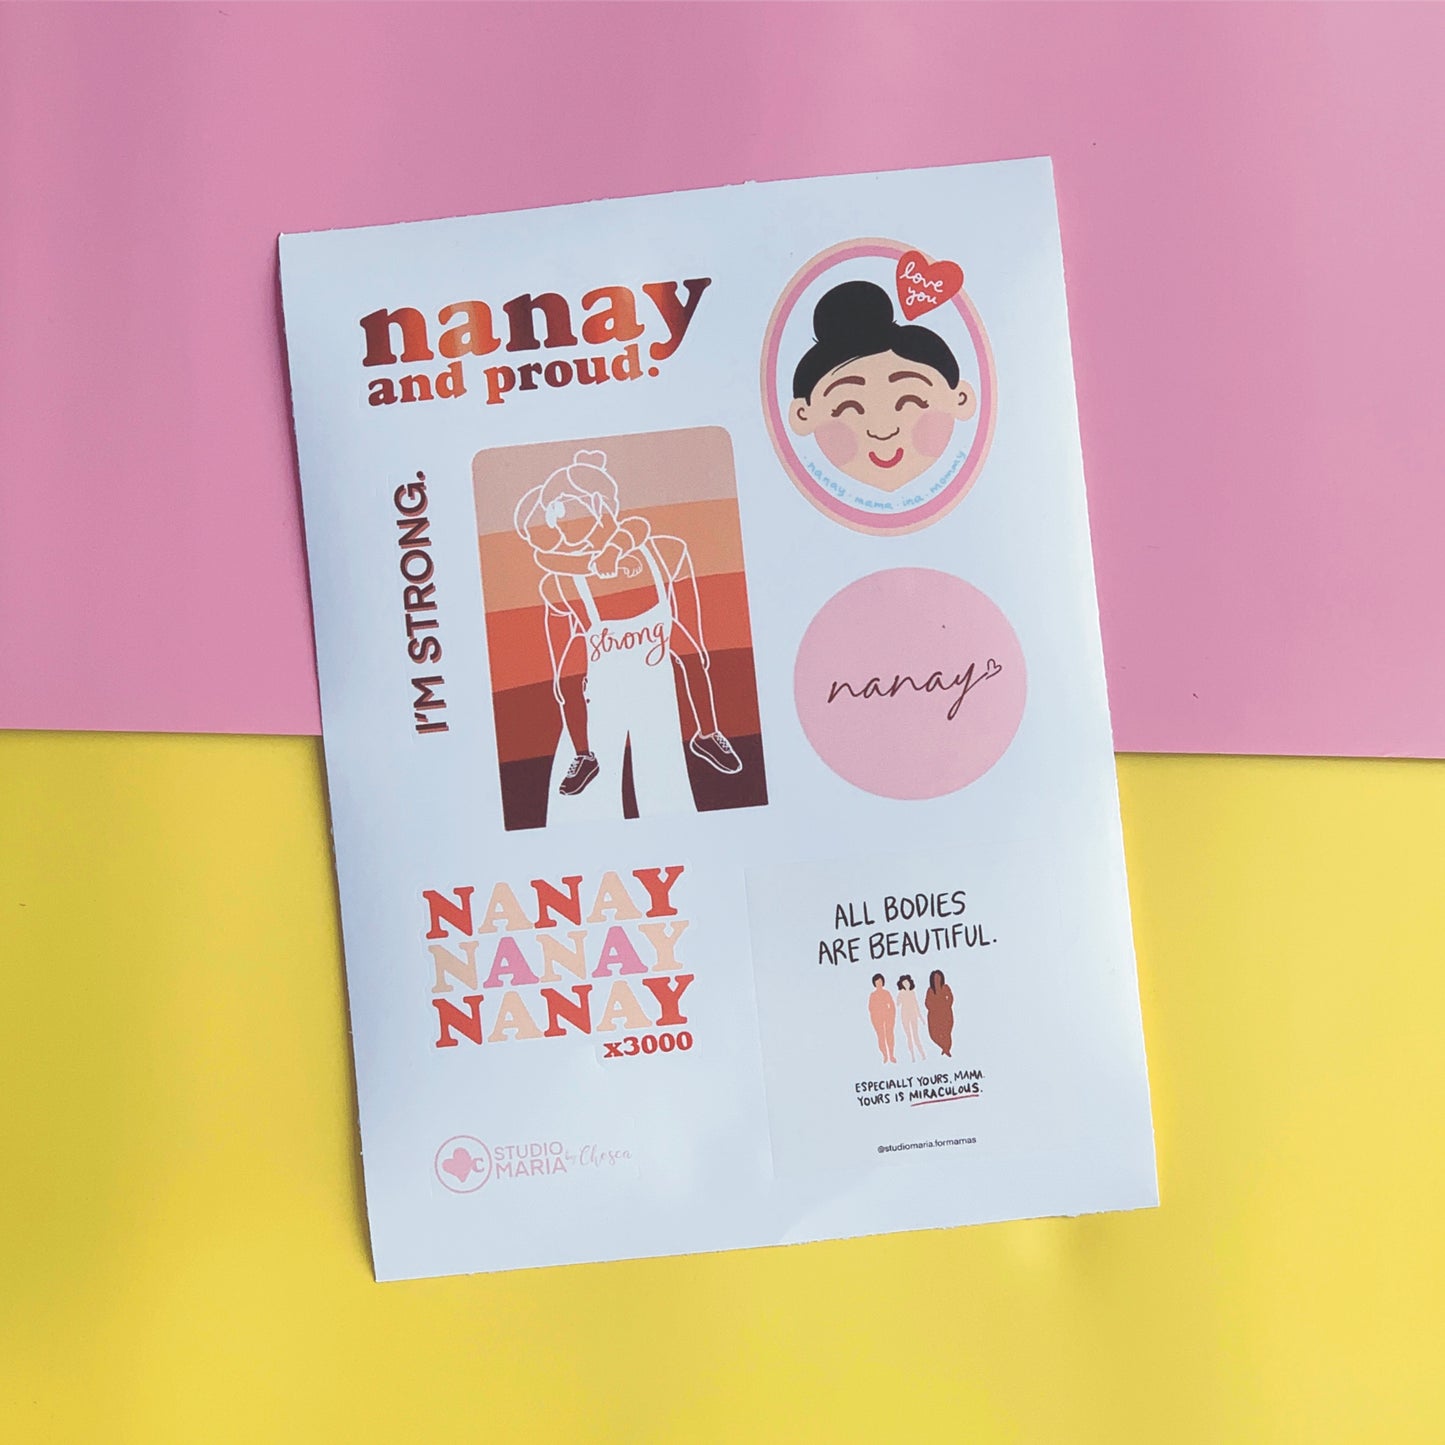 Nanay and Proud Sticker Set by Studio Maria